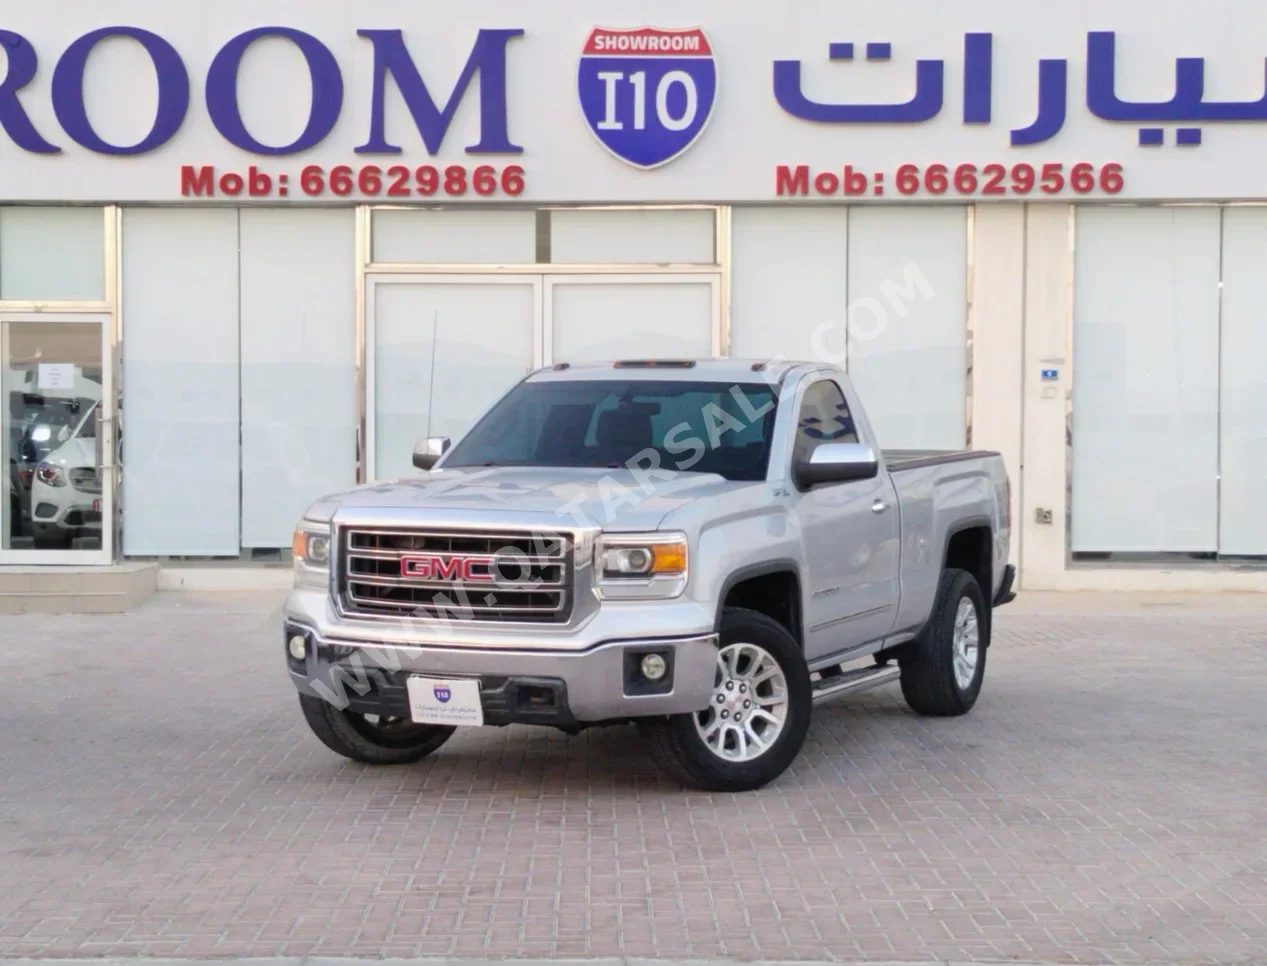 GMC  Sierra  2014  Automatic  203,000 Km  8 Cylinder  Four Wheel Drive (4WD)  Pick Up  Silver